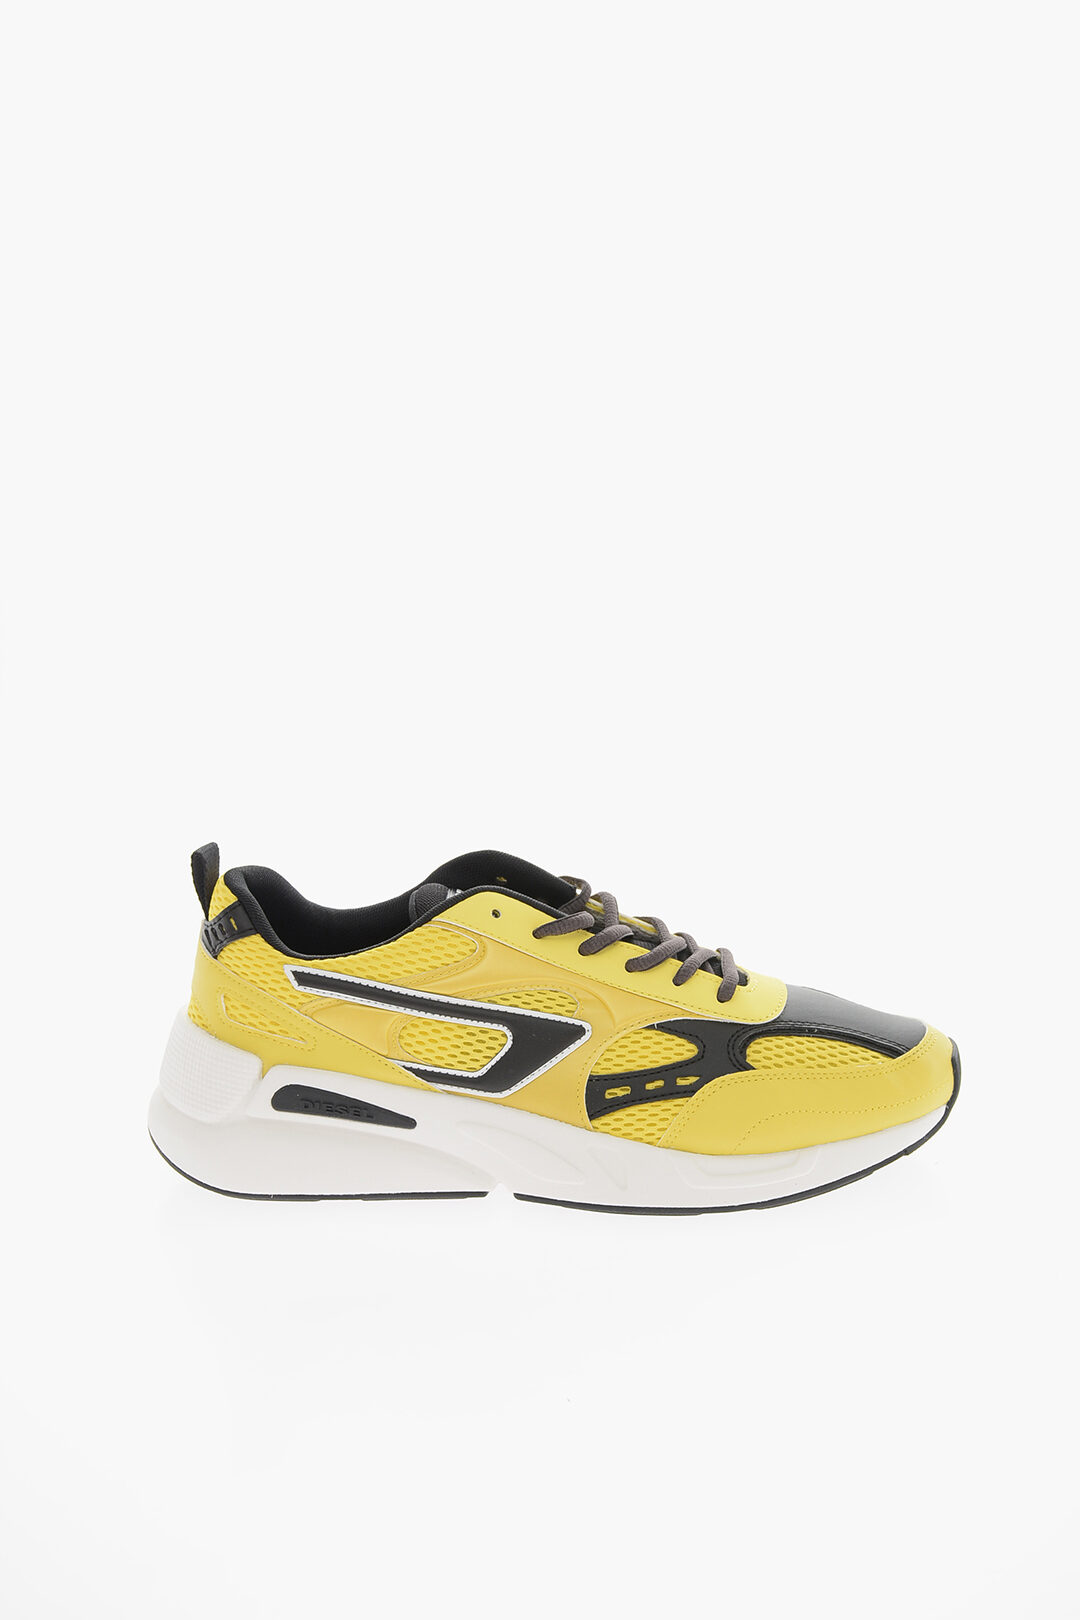 Lada bijvoeglijk naamwoord microscopisch Diesel Contrasting Sole Two-Tone Mesh and Faux Leather S-SERENDIPITY SPORT  Low-Top Sneakers men - Glamood Outlet